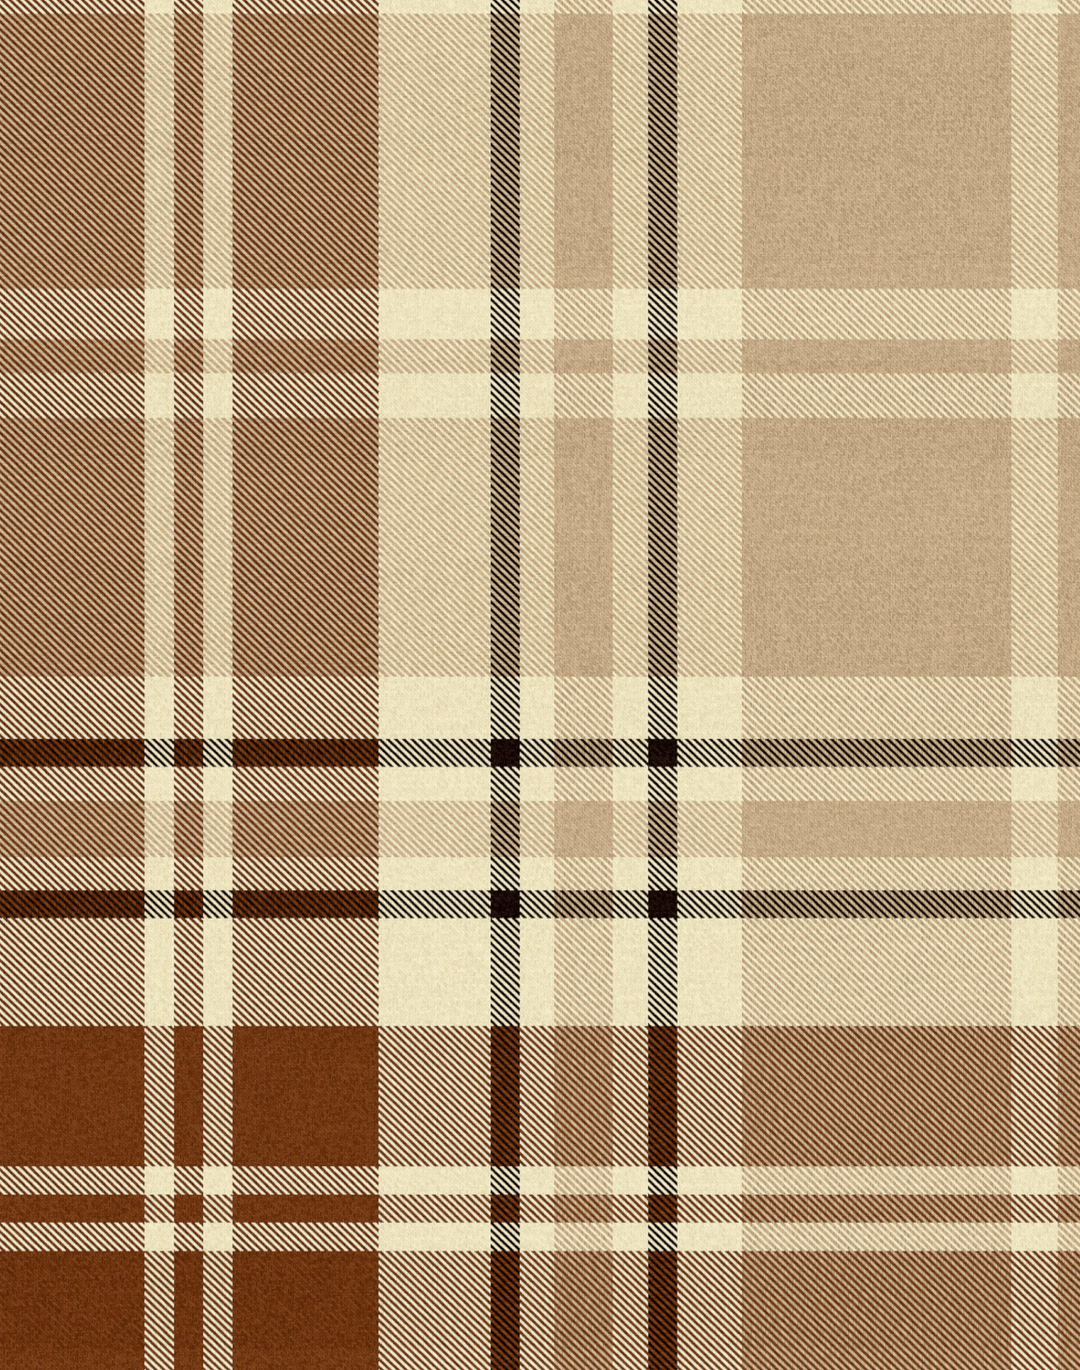 Chesterfield Plaid, Collective Cappuccino – The Pattern